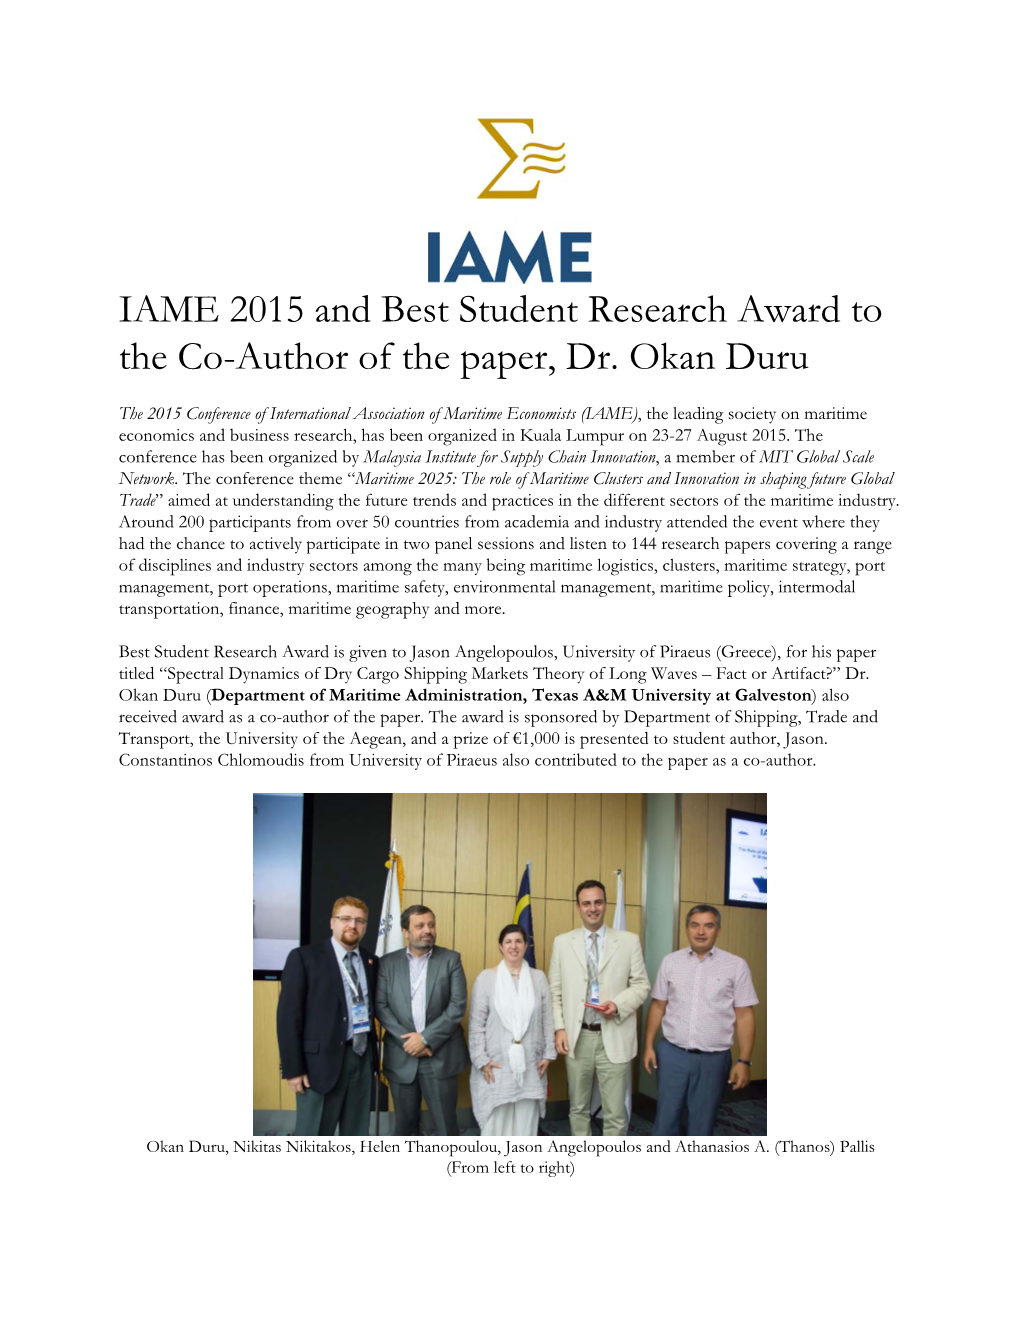 IAME 2015 and Best Student Research Award to the Co-Author of the Paper, Dr